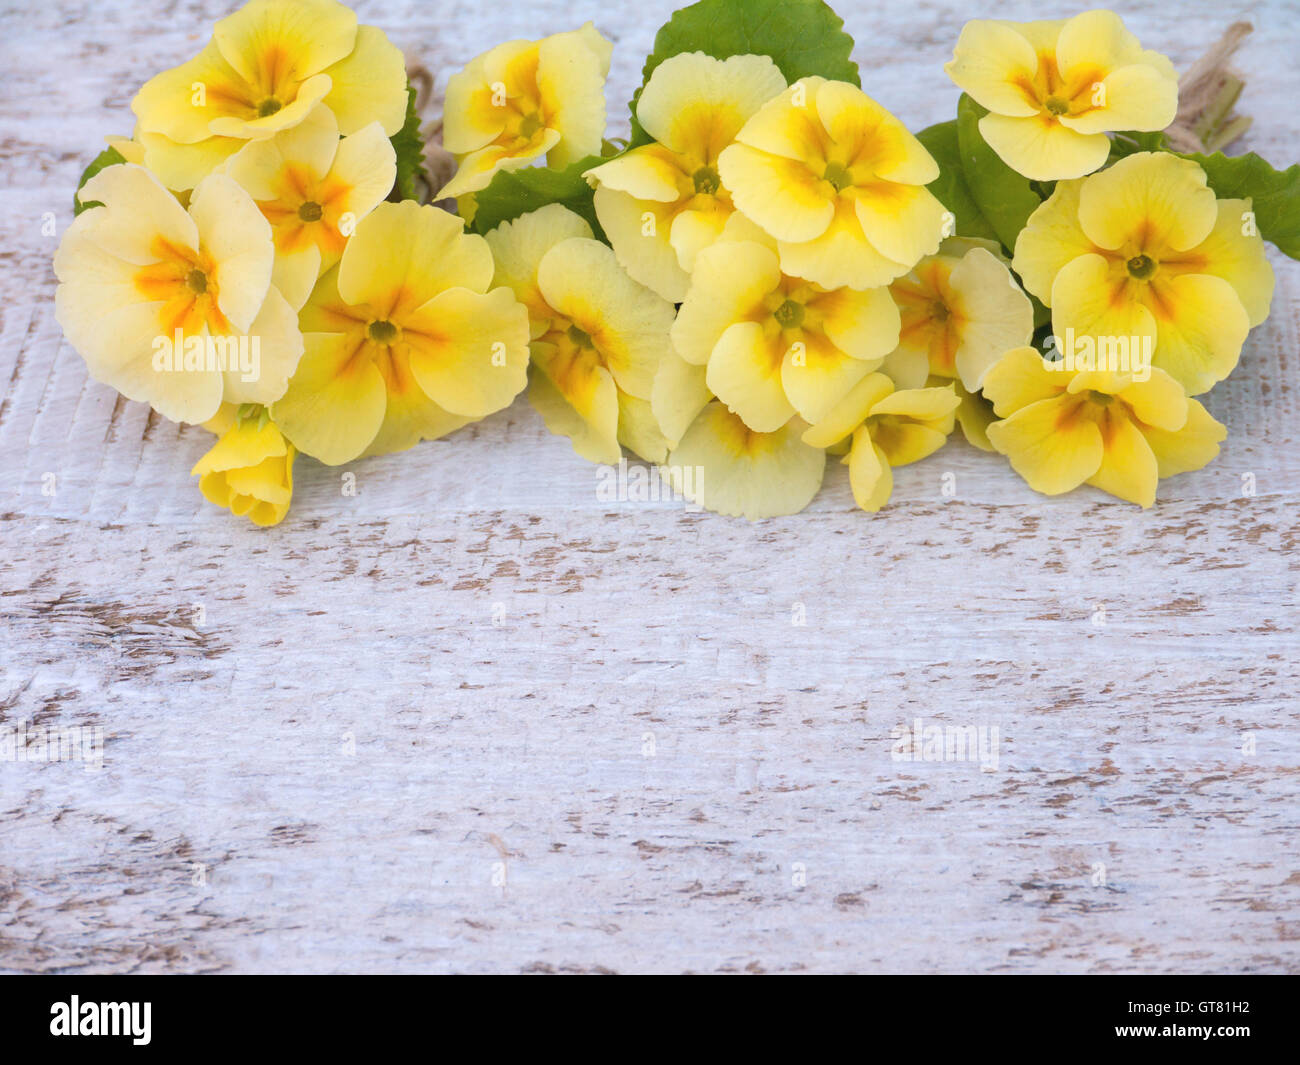 Yellow primrose flowers bouquets on the white rough painted background Stock Photo